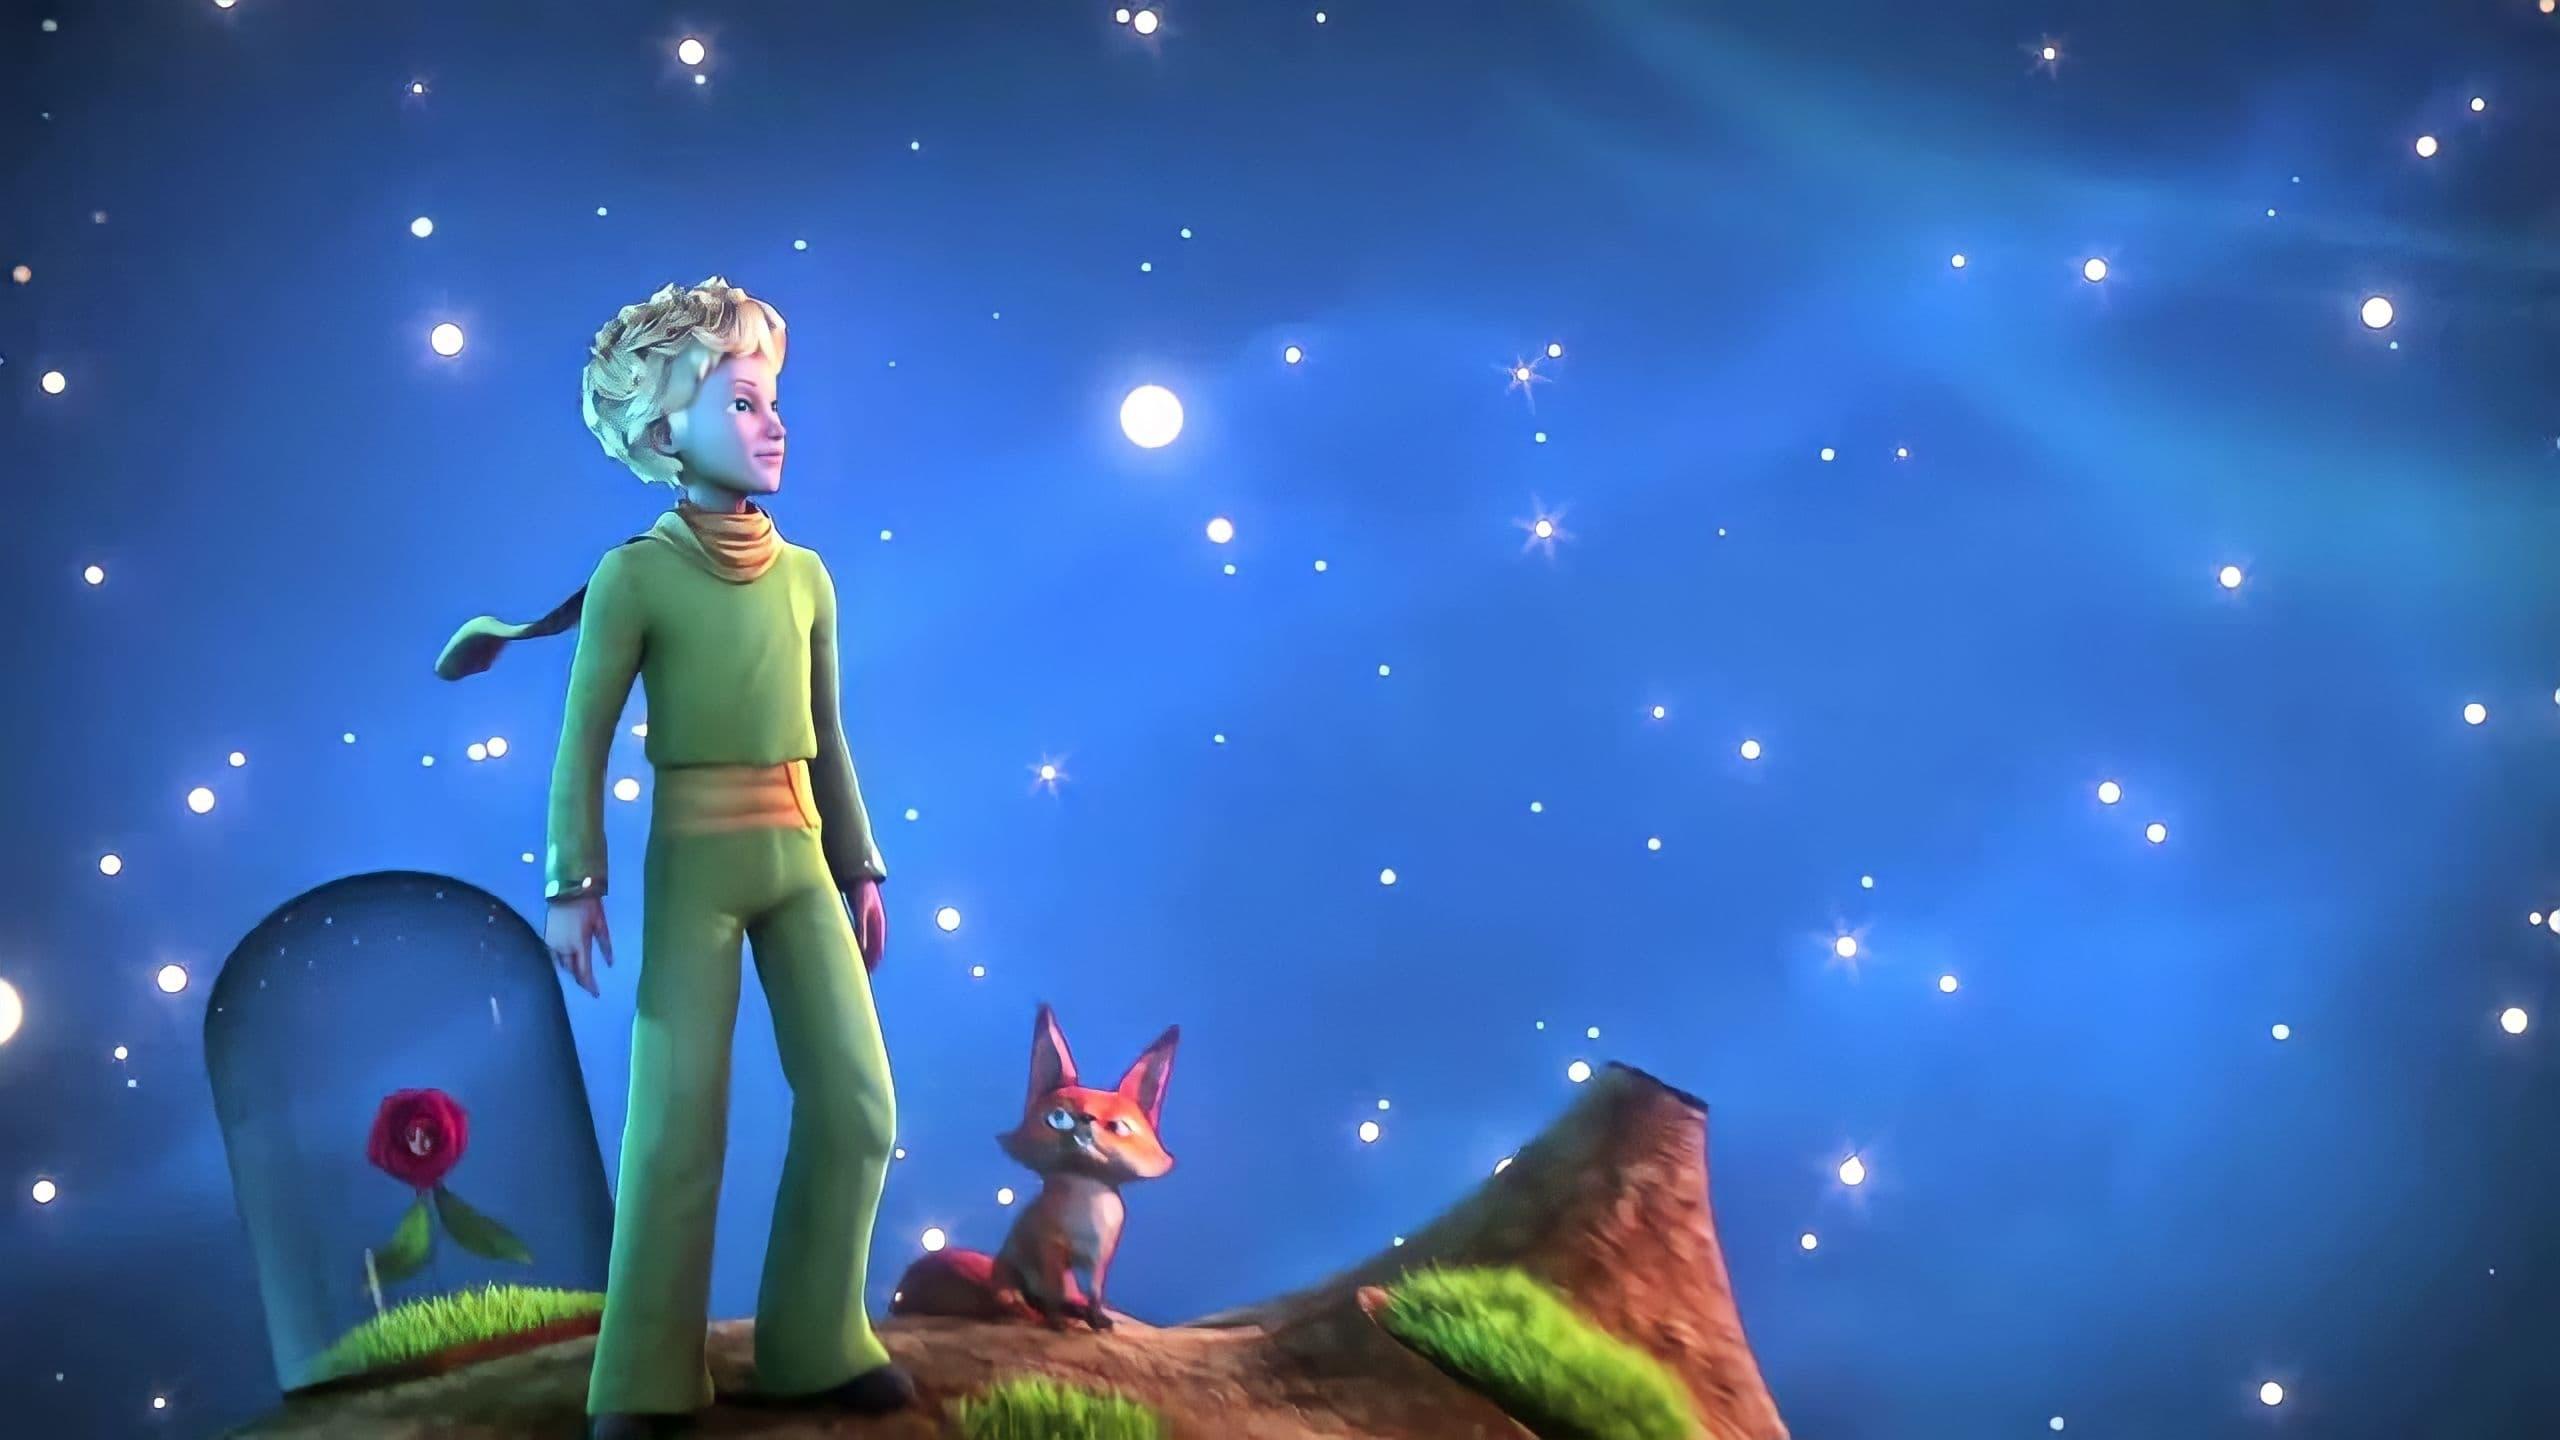 The Little Prince backdrop